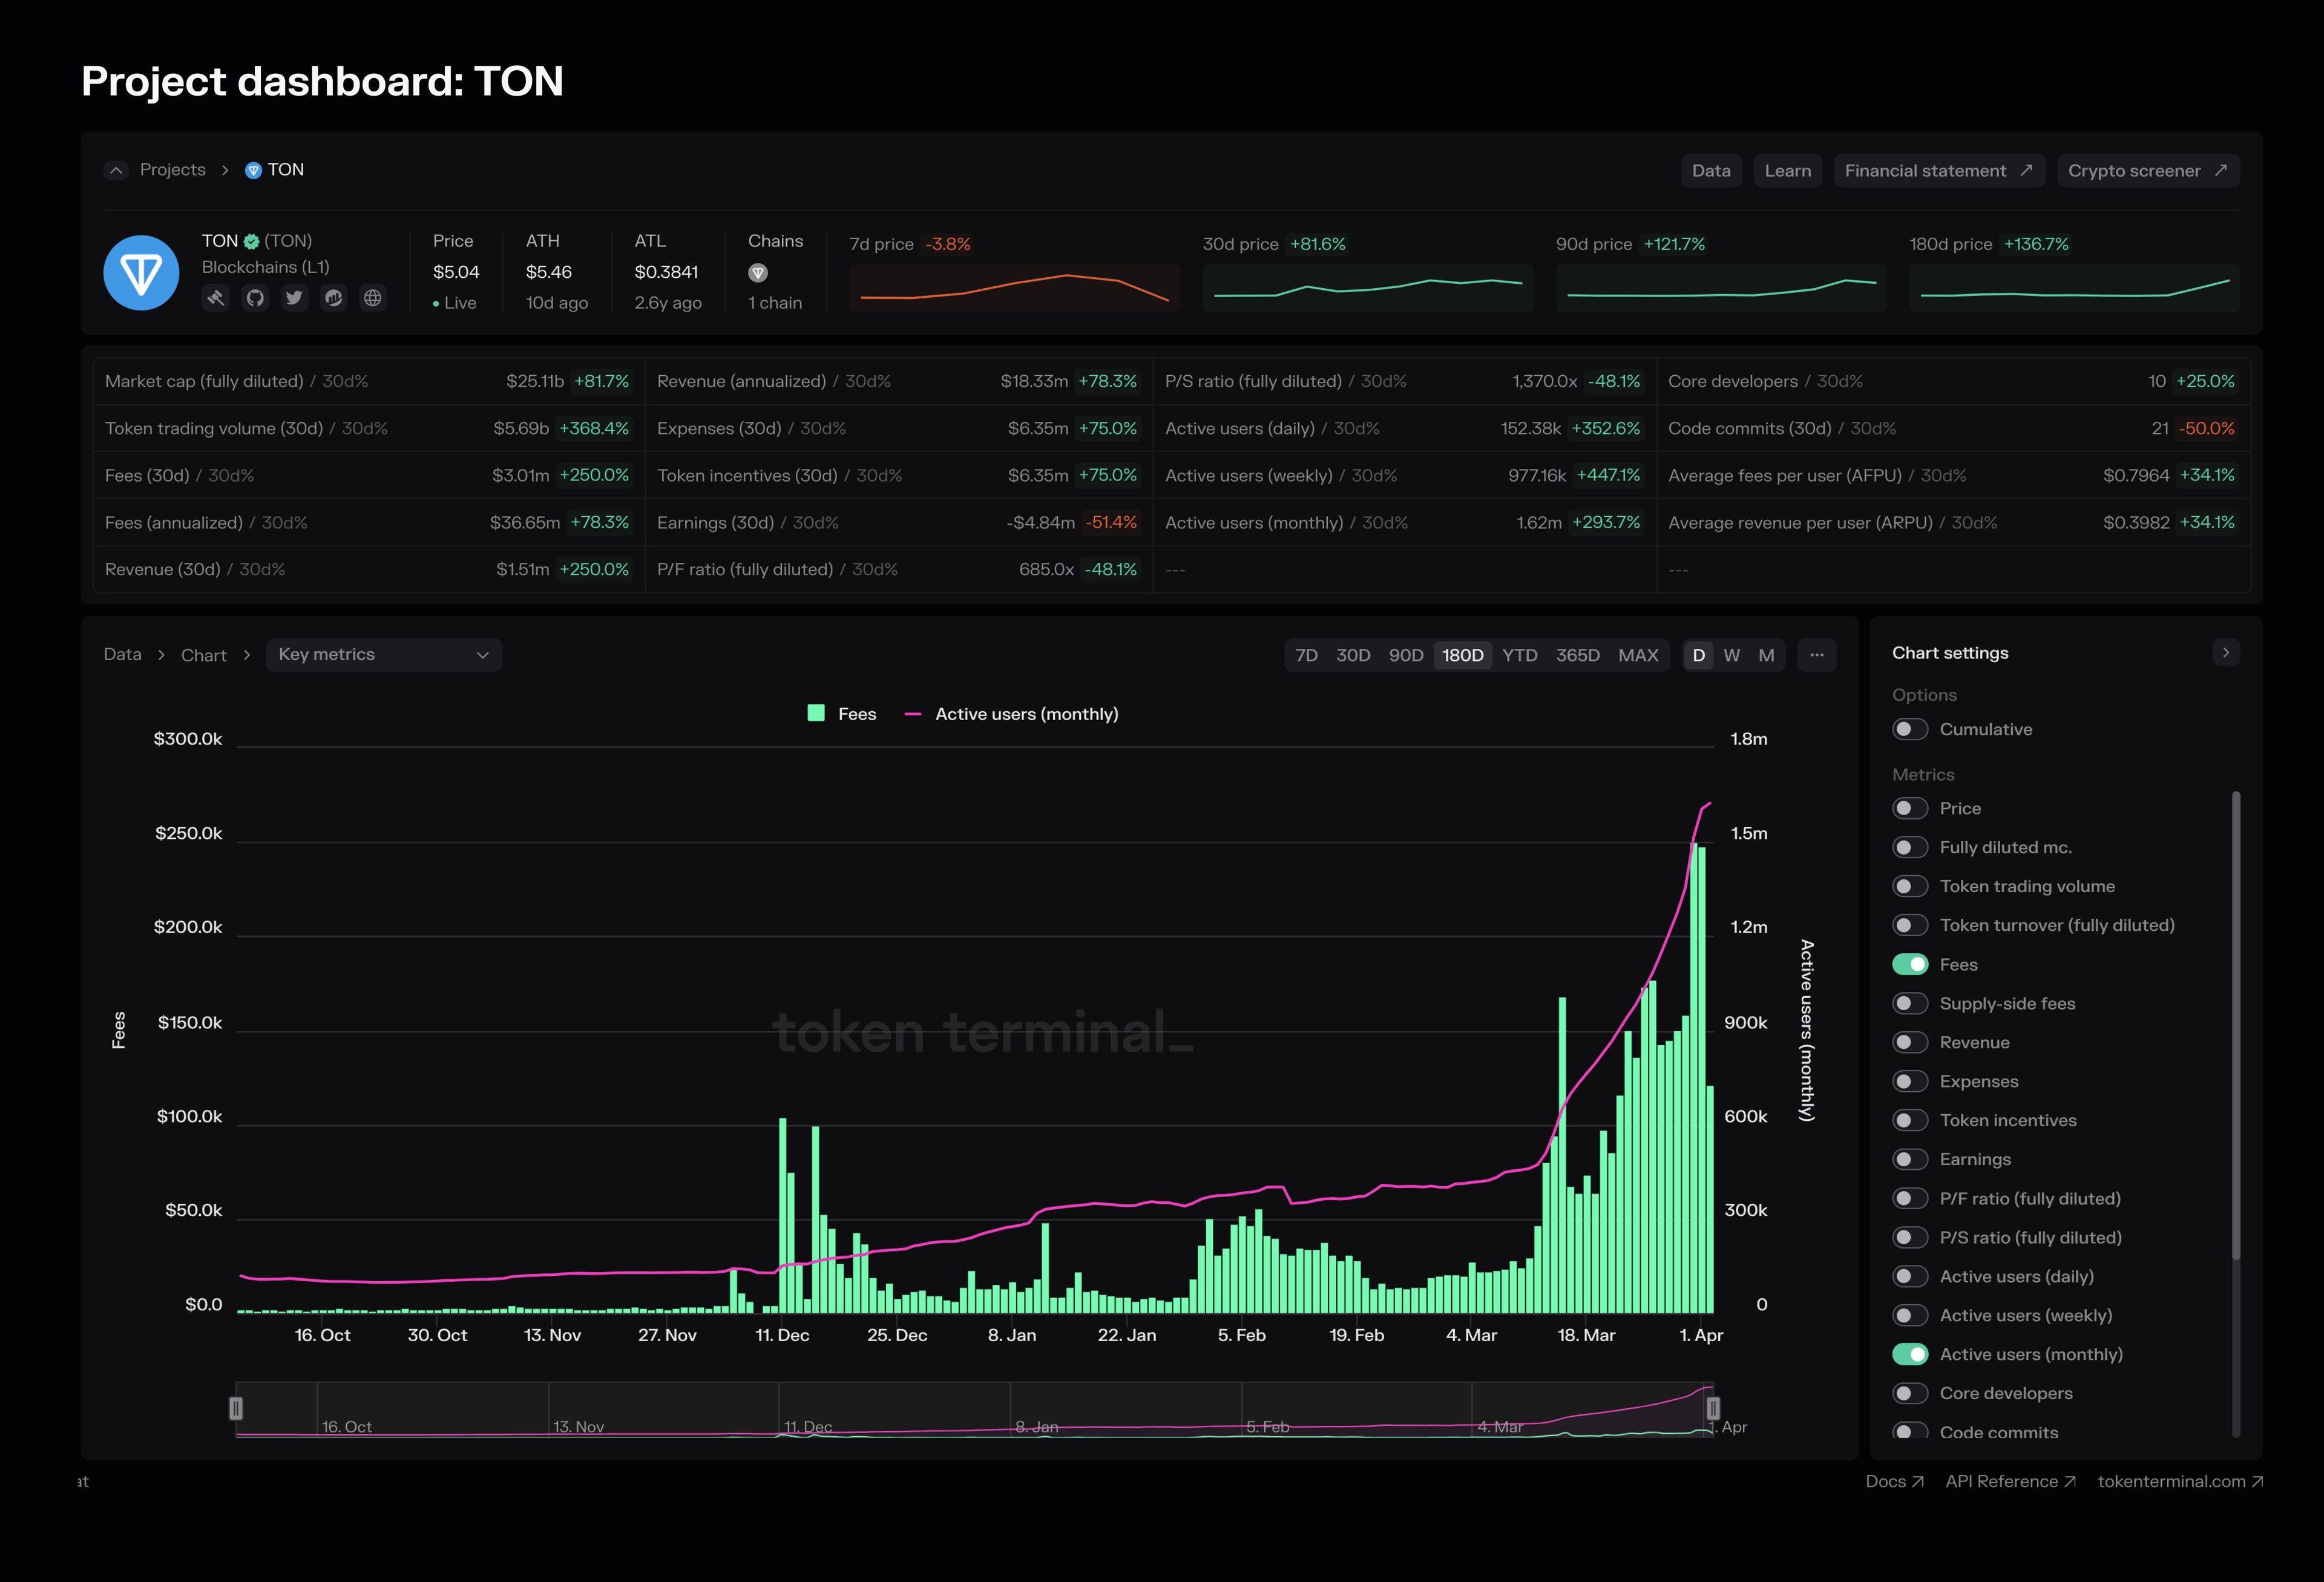 An overview of the TON project dashboard.